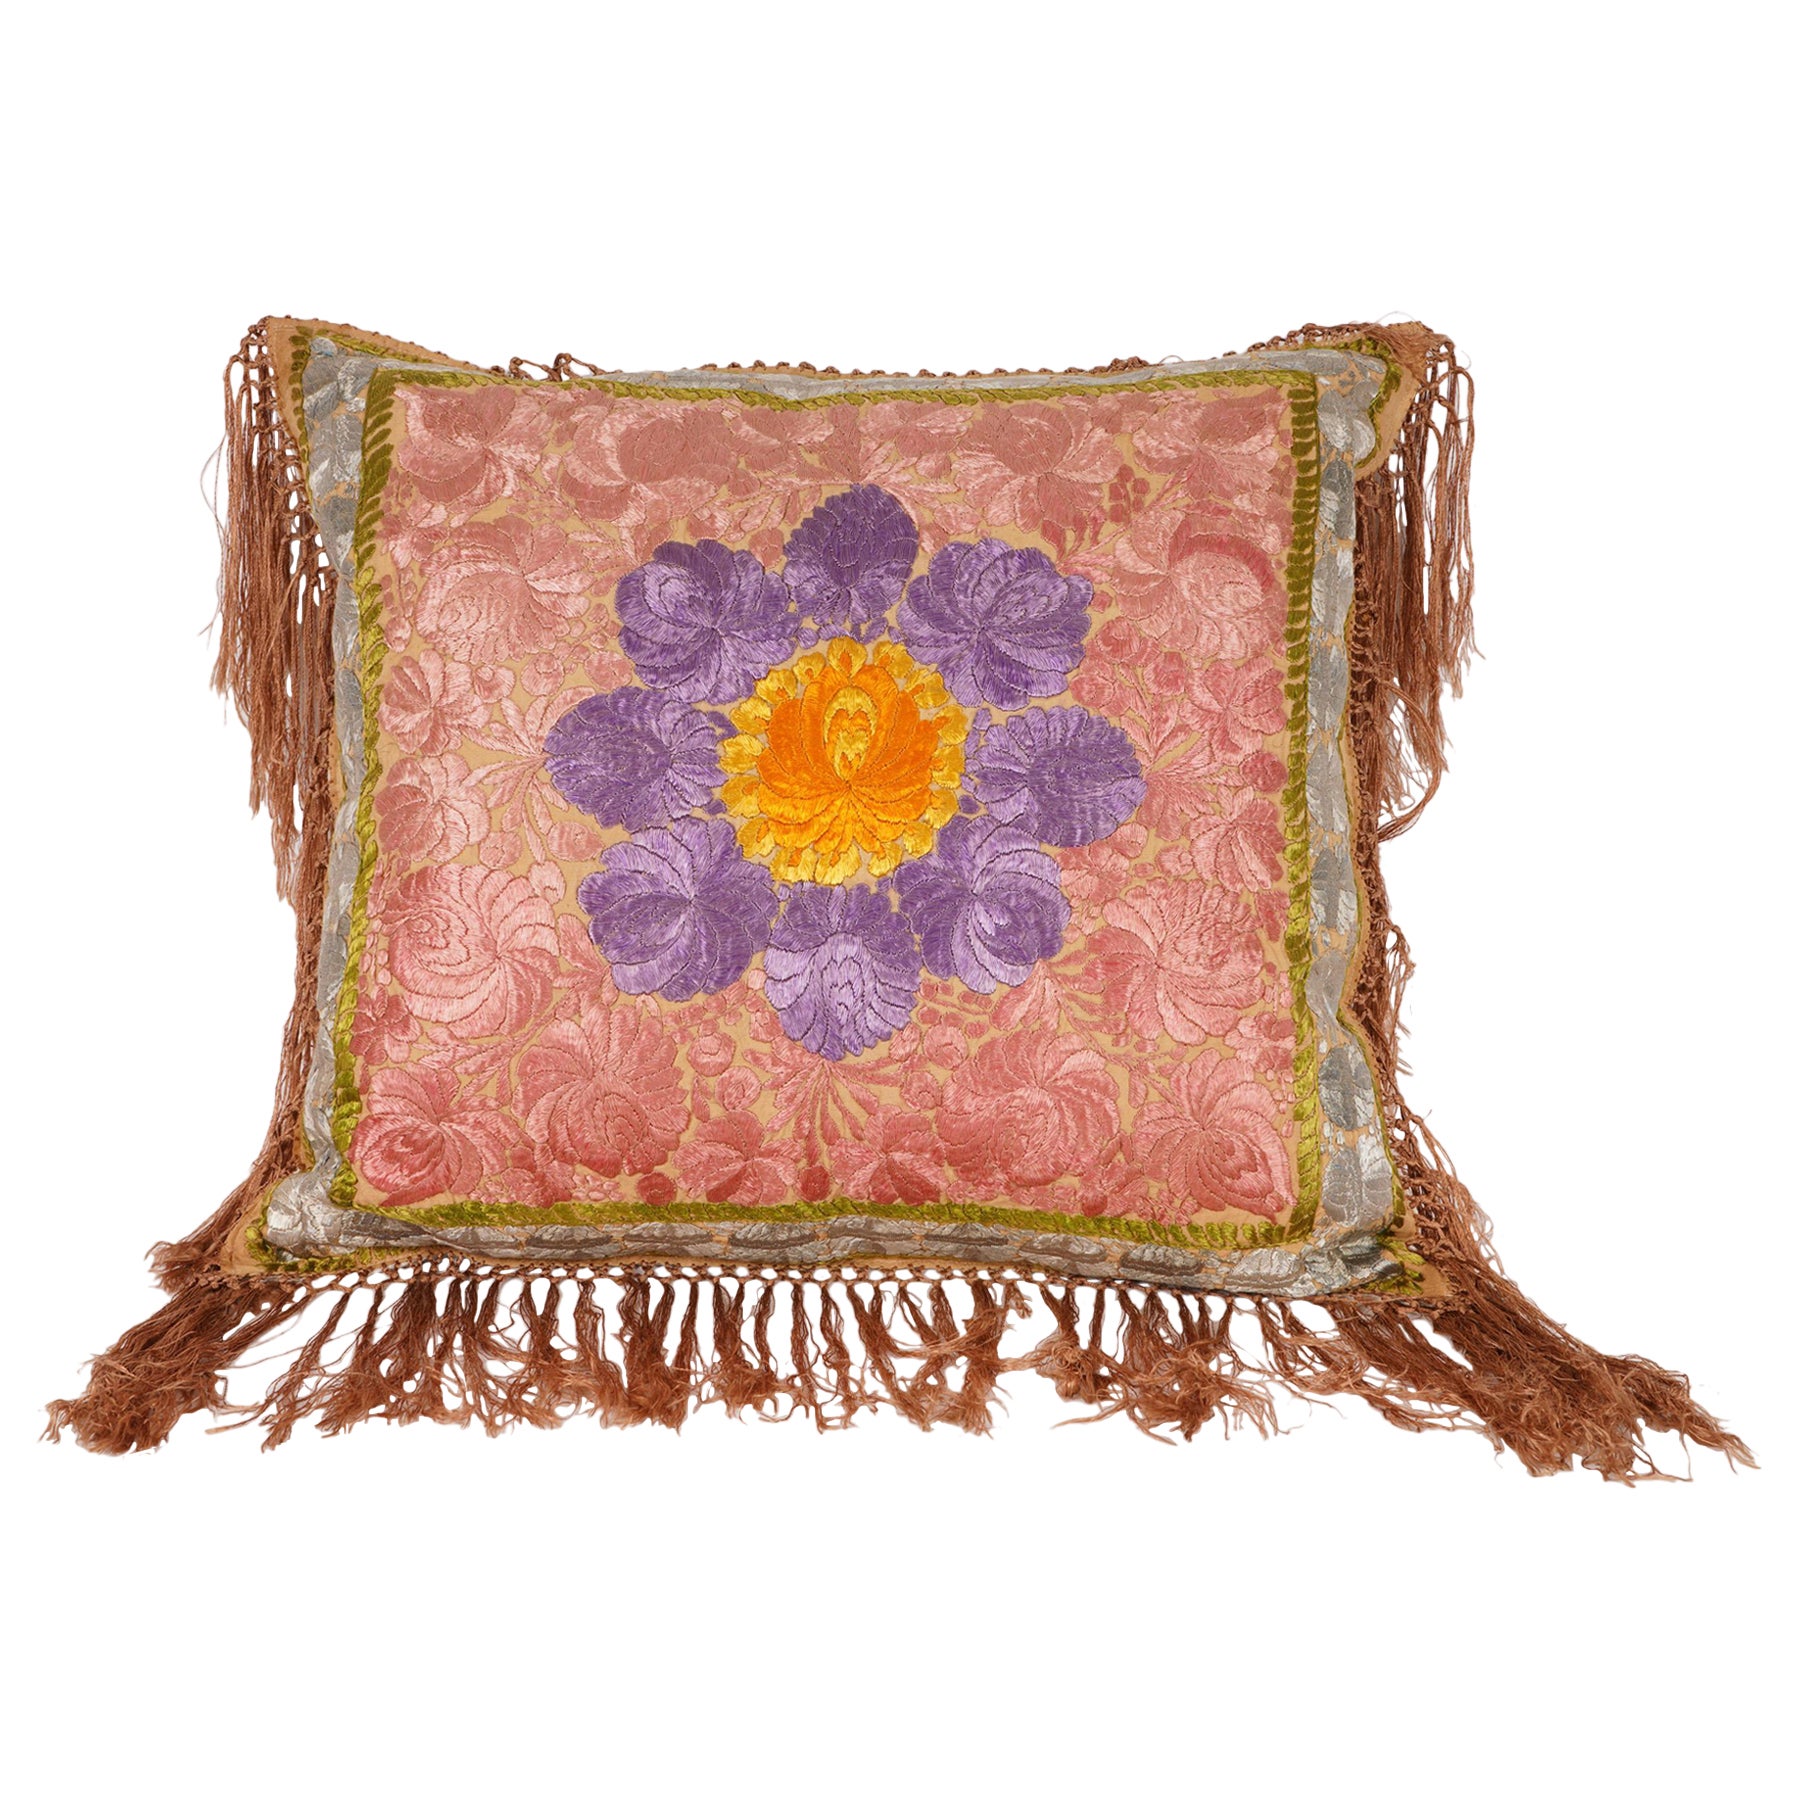 Pillowcase Made from a Matyo Embroidery, Hungary, Early 20th C. For Sale